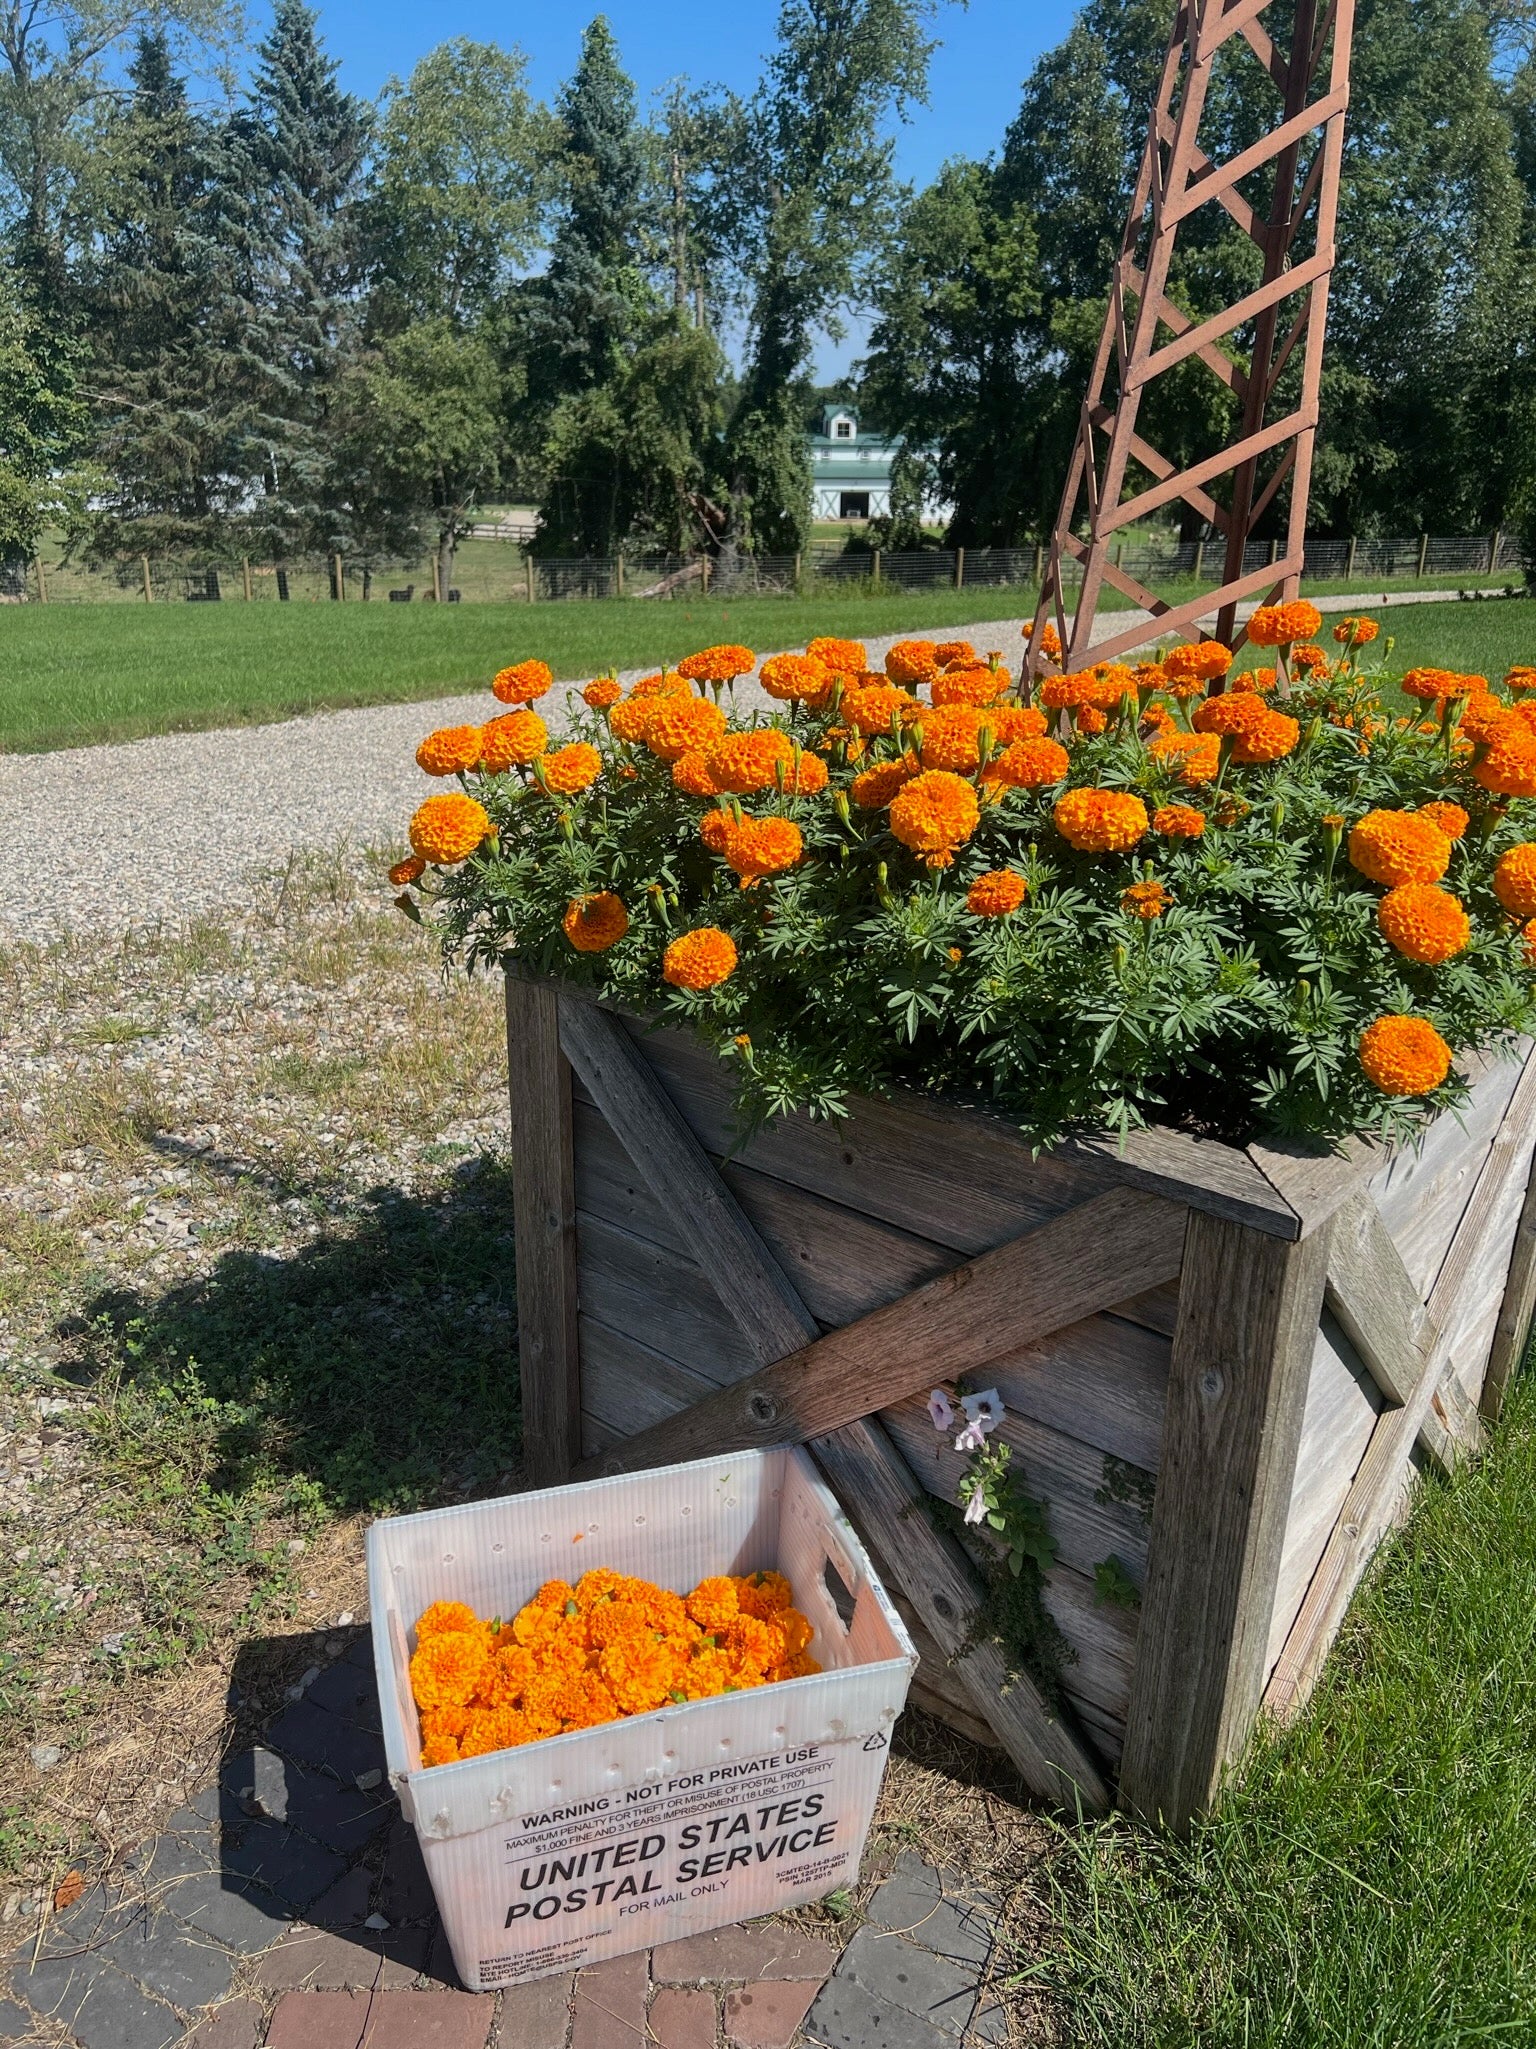 Marigolds grown in a flower box on the Mitchell farm- we'll use these to create yellow yarn!